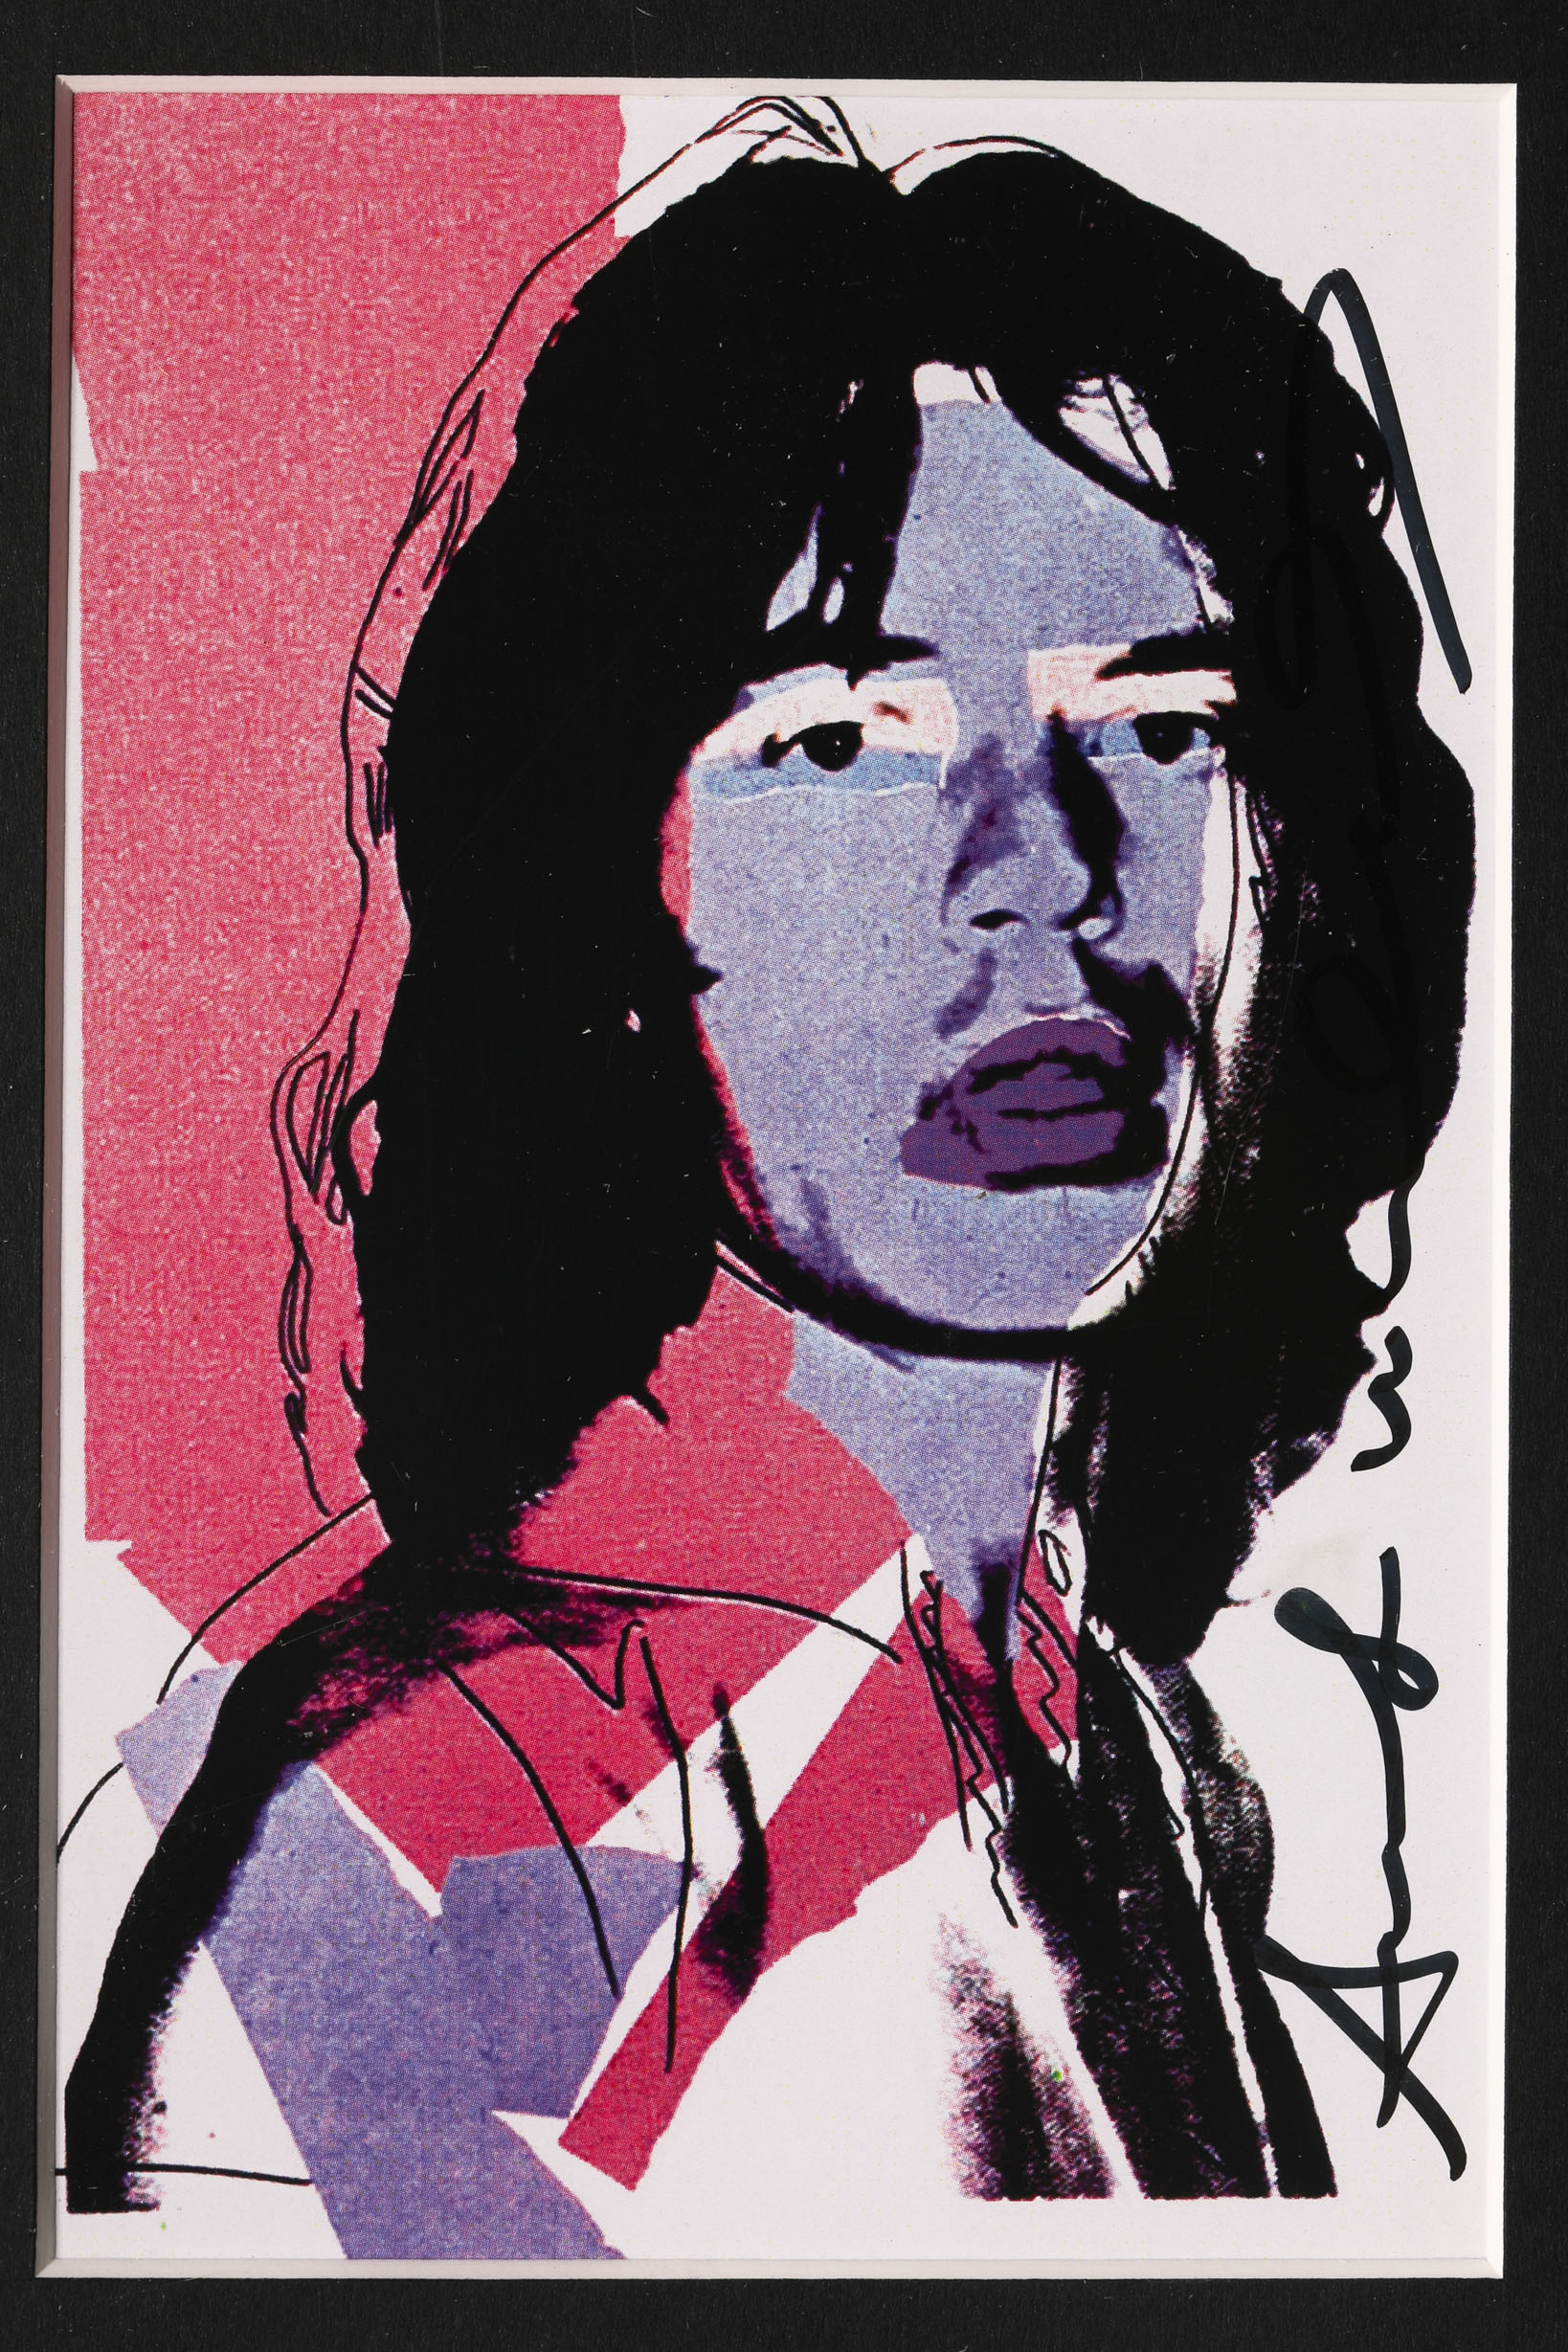 Andy Warhol, Mini Portfolio Mick Jagger with 10 Prints, 1975, signed - Image 3 of 16